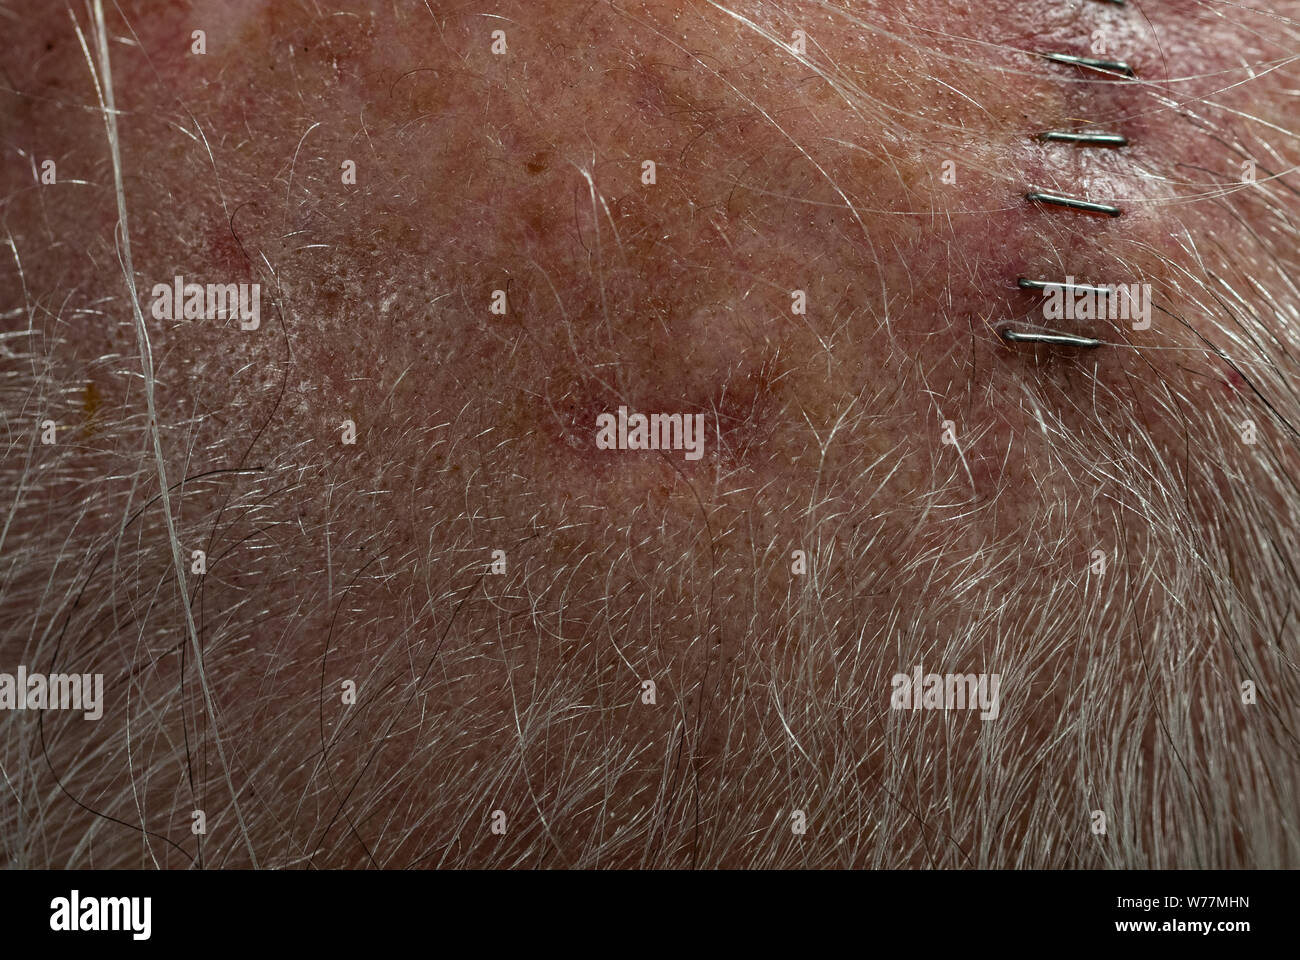 View of 65 year old male's scalp with squamous cell carcinoma site (horizontal) at center along hairline. Site is approx 3/4' across, 1/4' high. Stock Photo